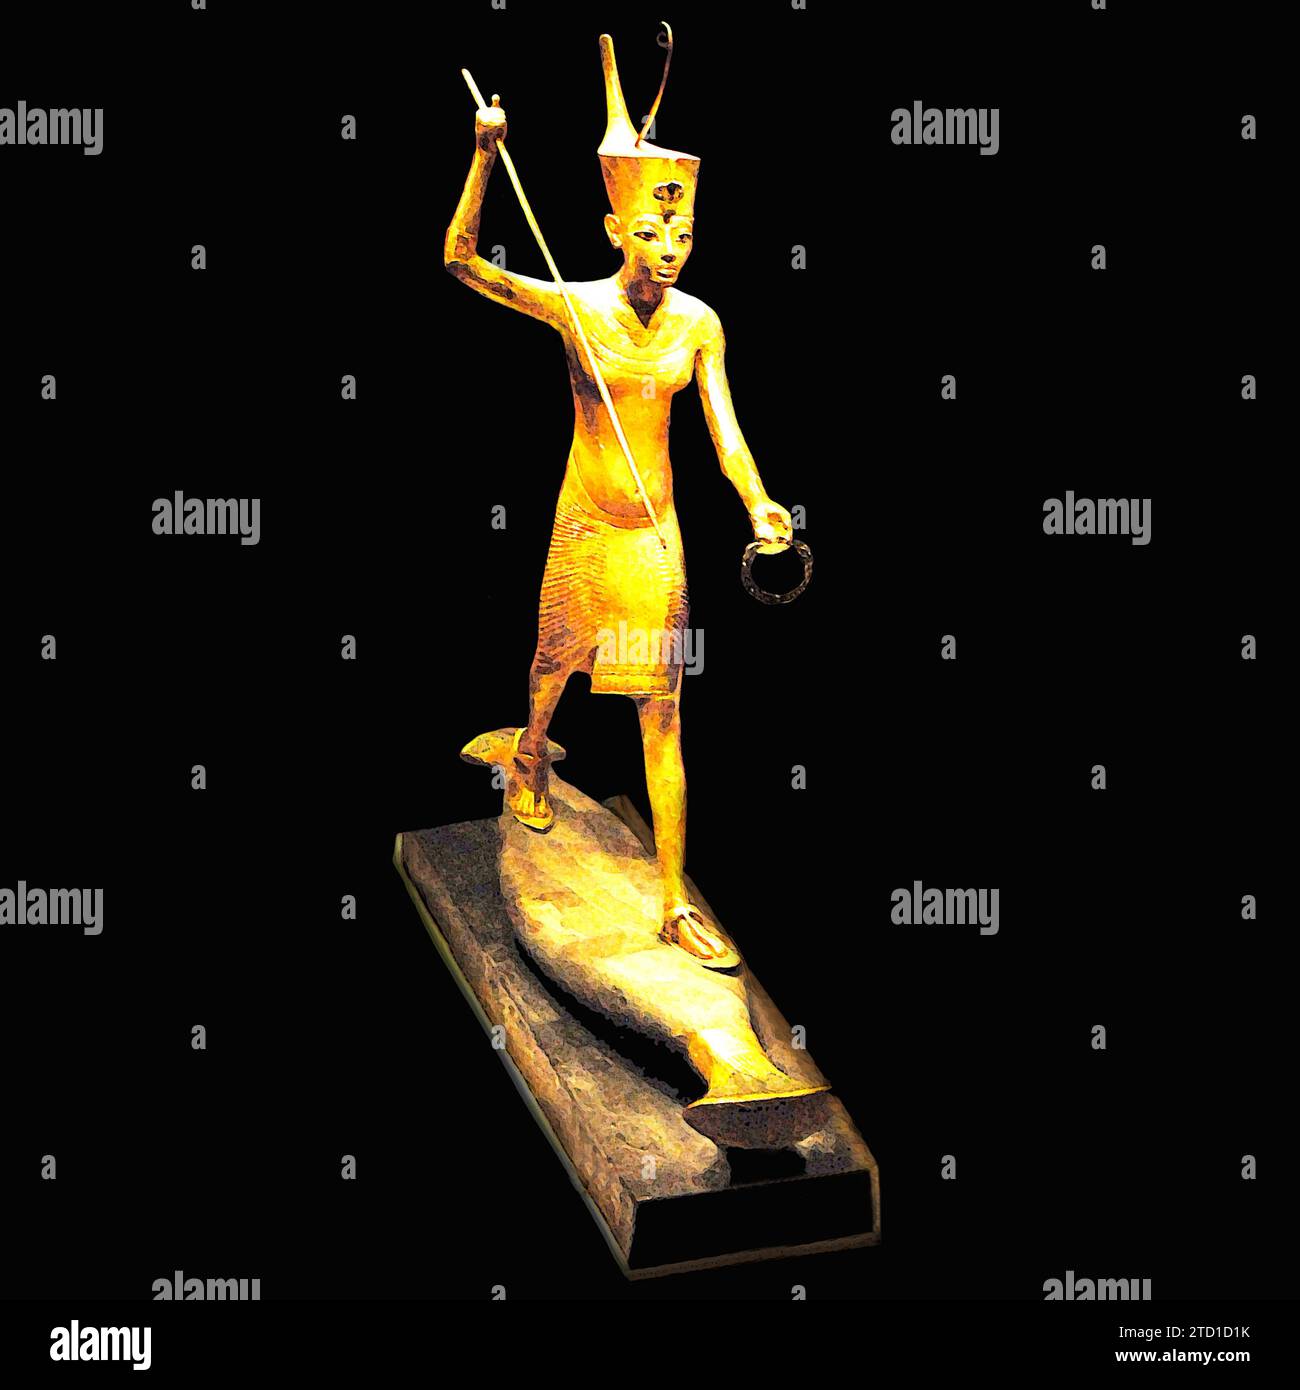 Art illustration inspired by the gilded, wooden statuette of Egyptian Pharaoh Tutankhamun standing on wooden boat, painted to represent a papyrus boat Stock Photo